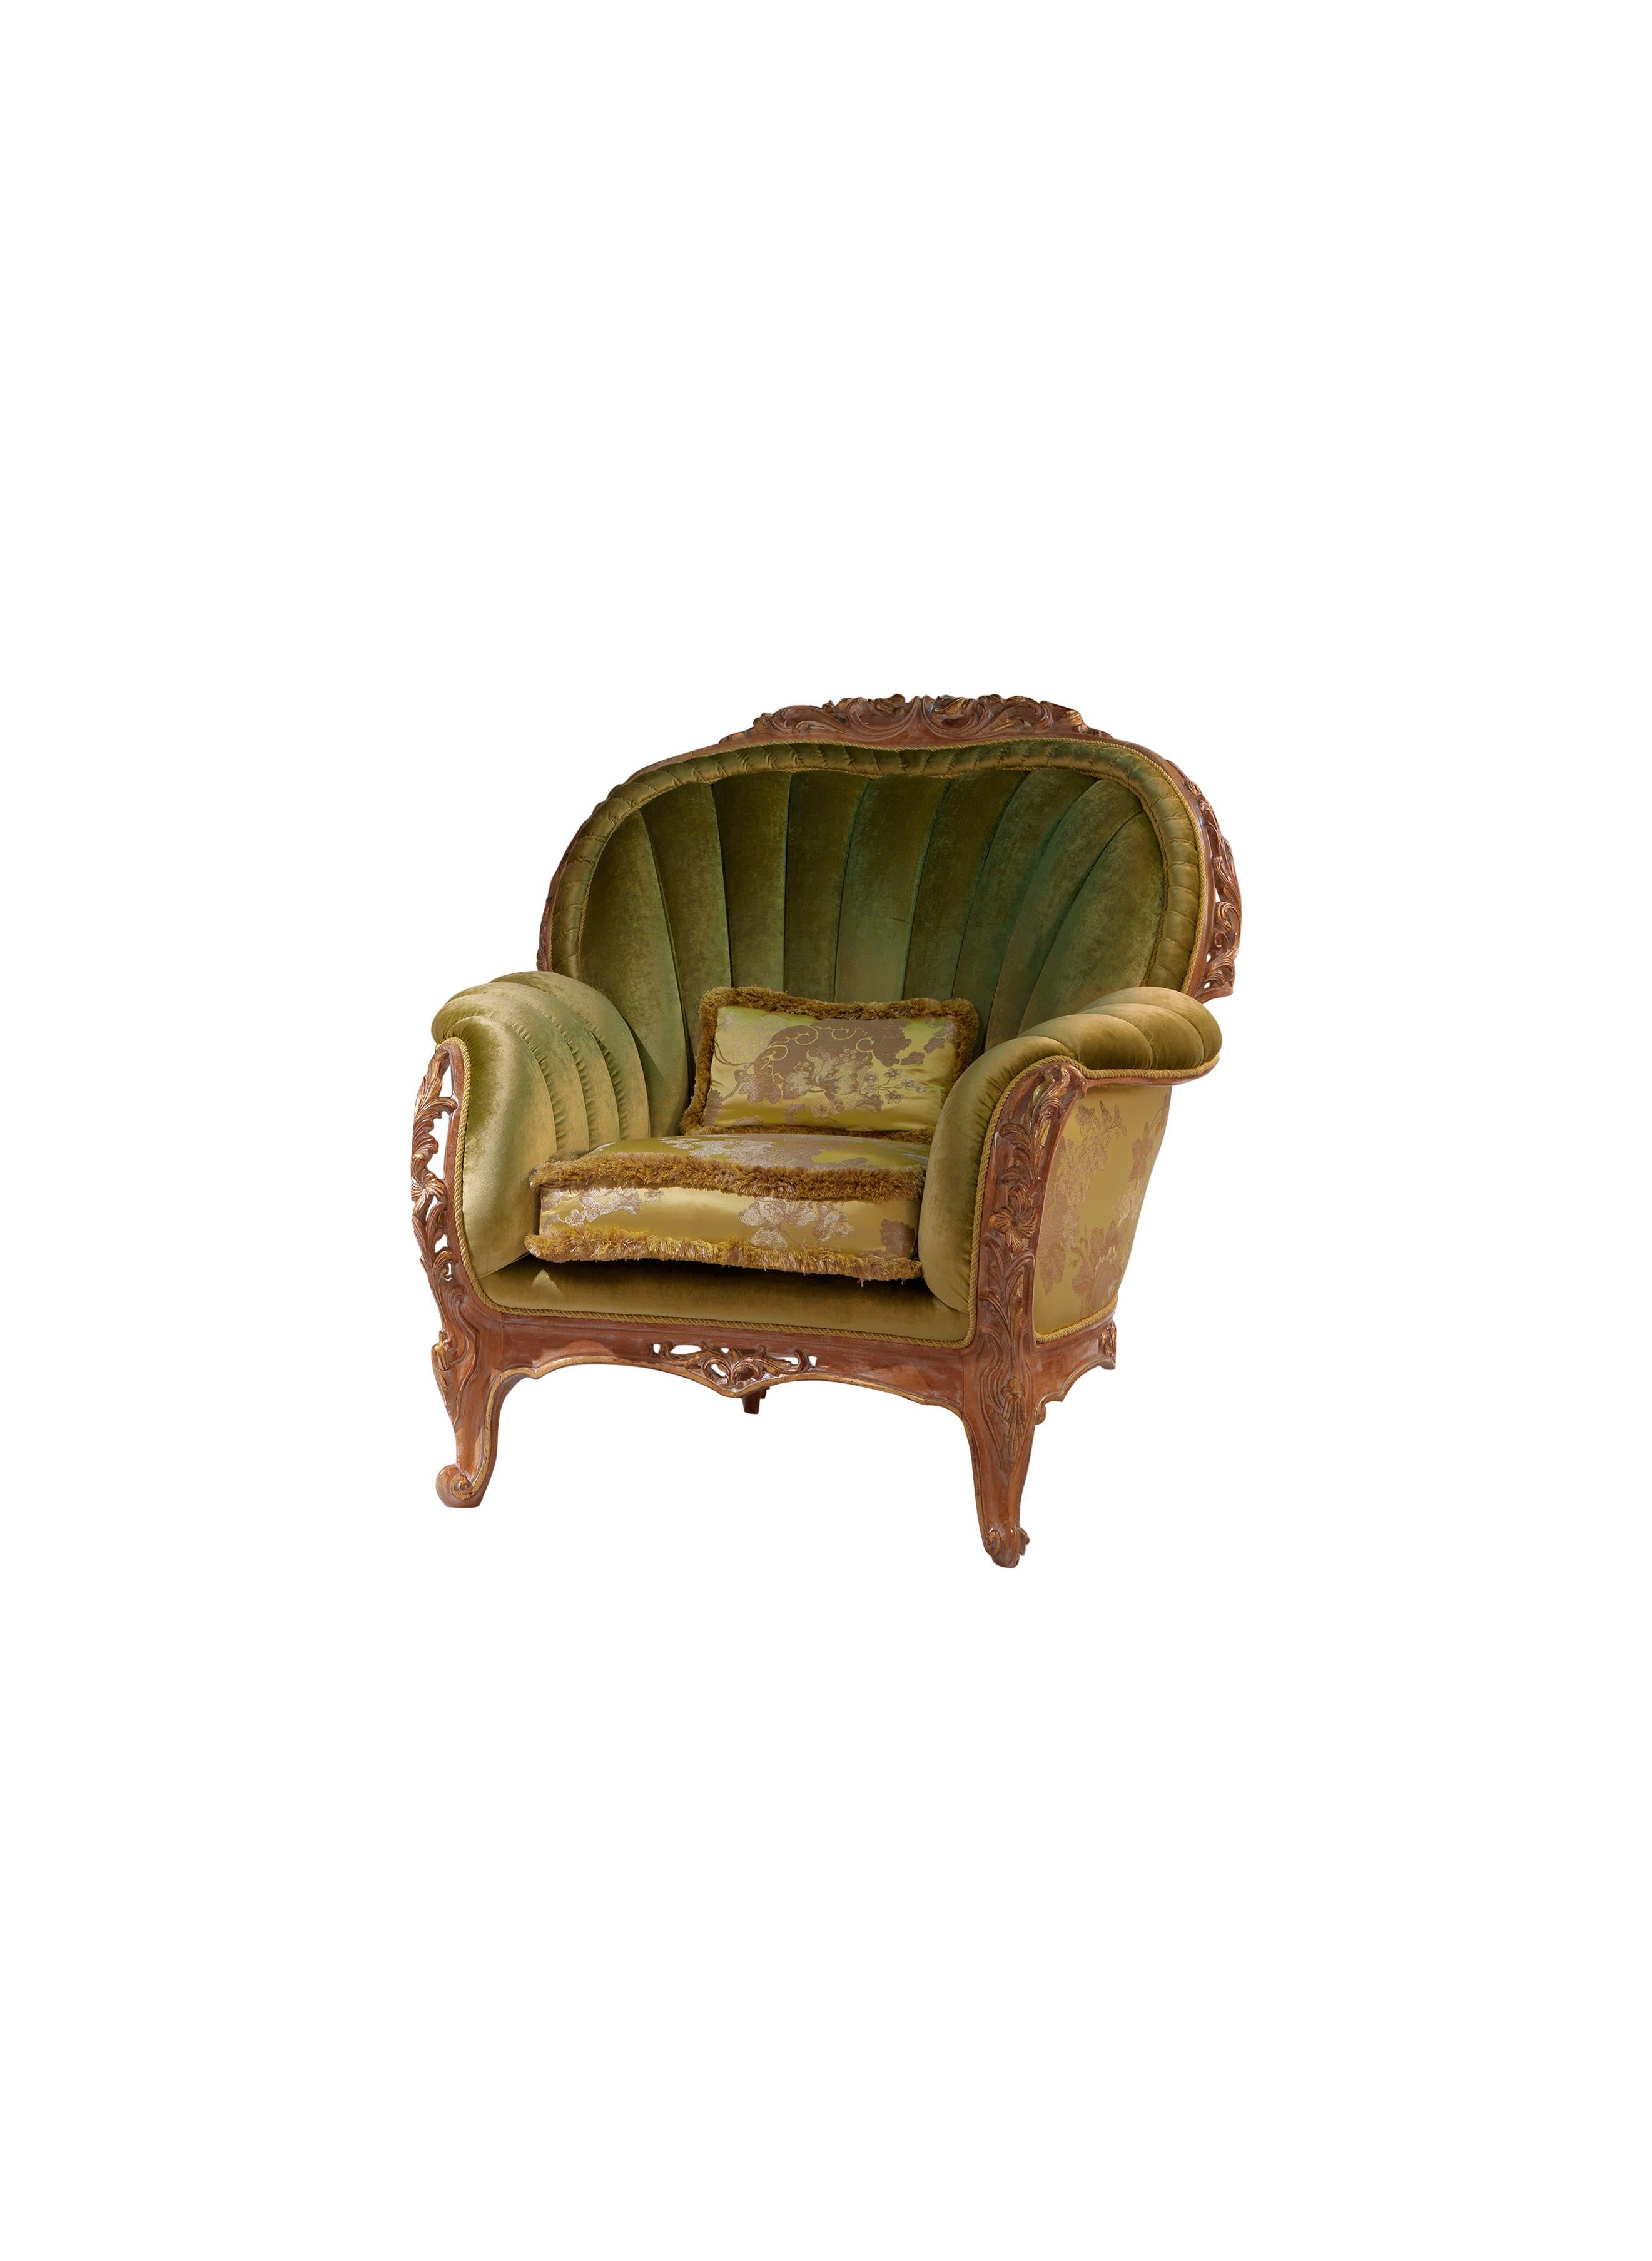 The magnificent armchair Monet presents ornately carved decorated frame with floral motifs with rounded edges, padded upholstered sides and armrests, seat cushion with brush. It is upholstered with a plain velvet, in combination with a damask fabric